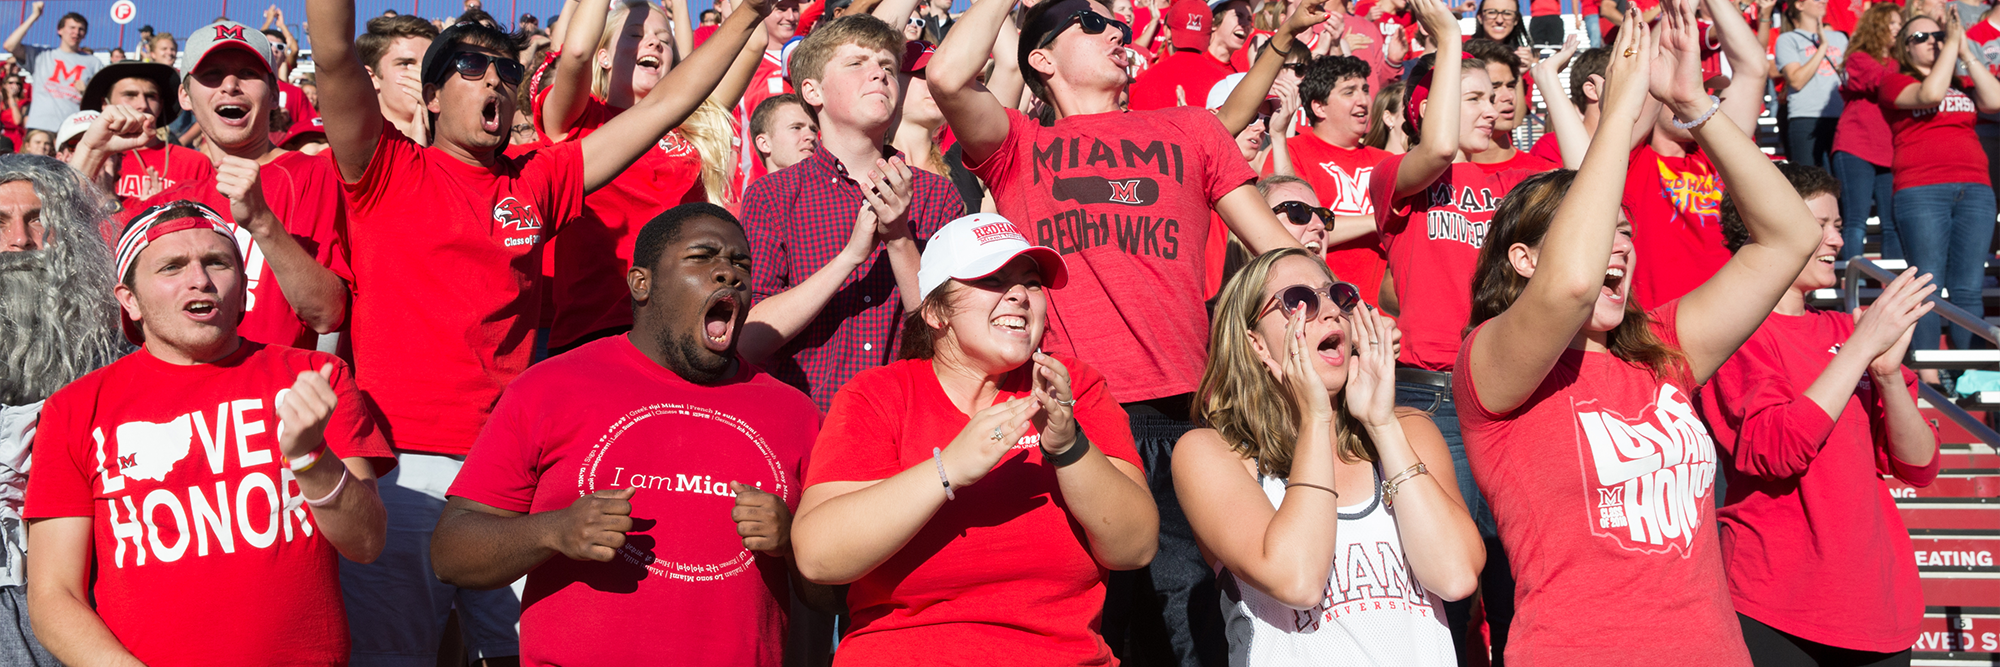 Students cheer on the Redhawks during a sporting event at Miami University.